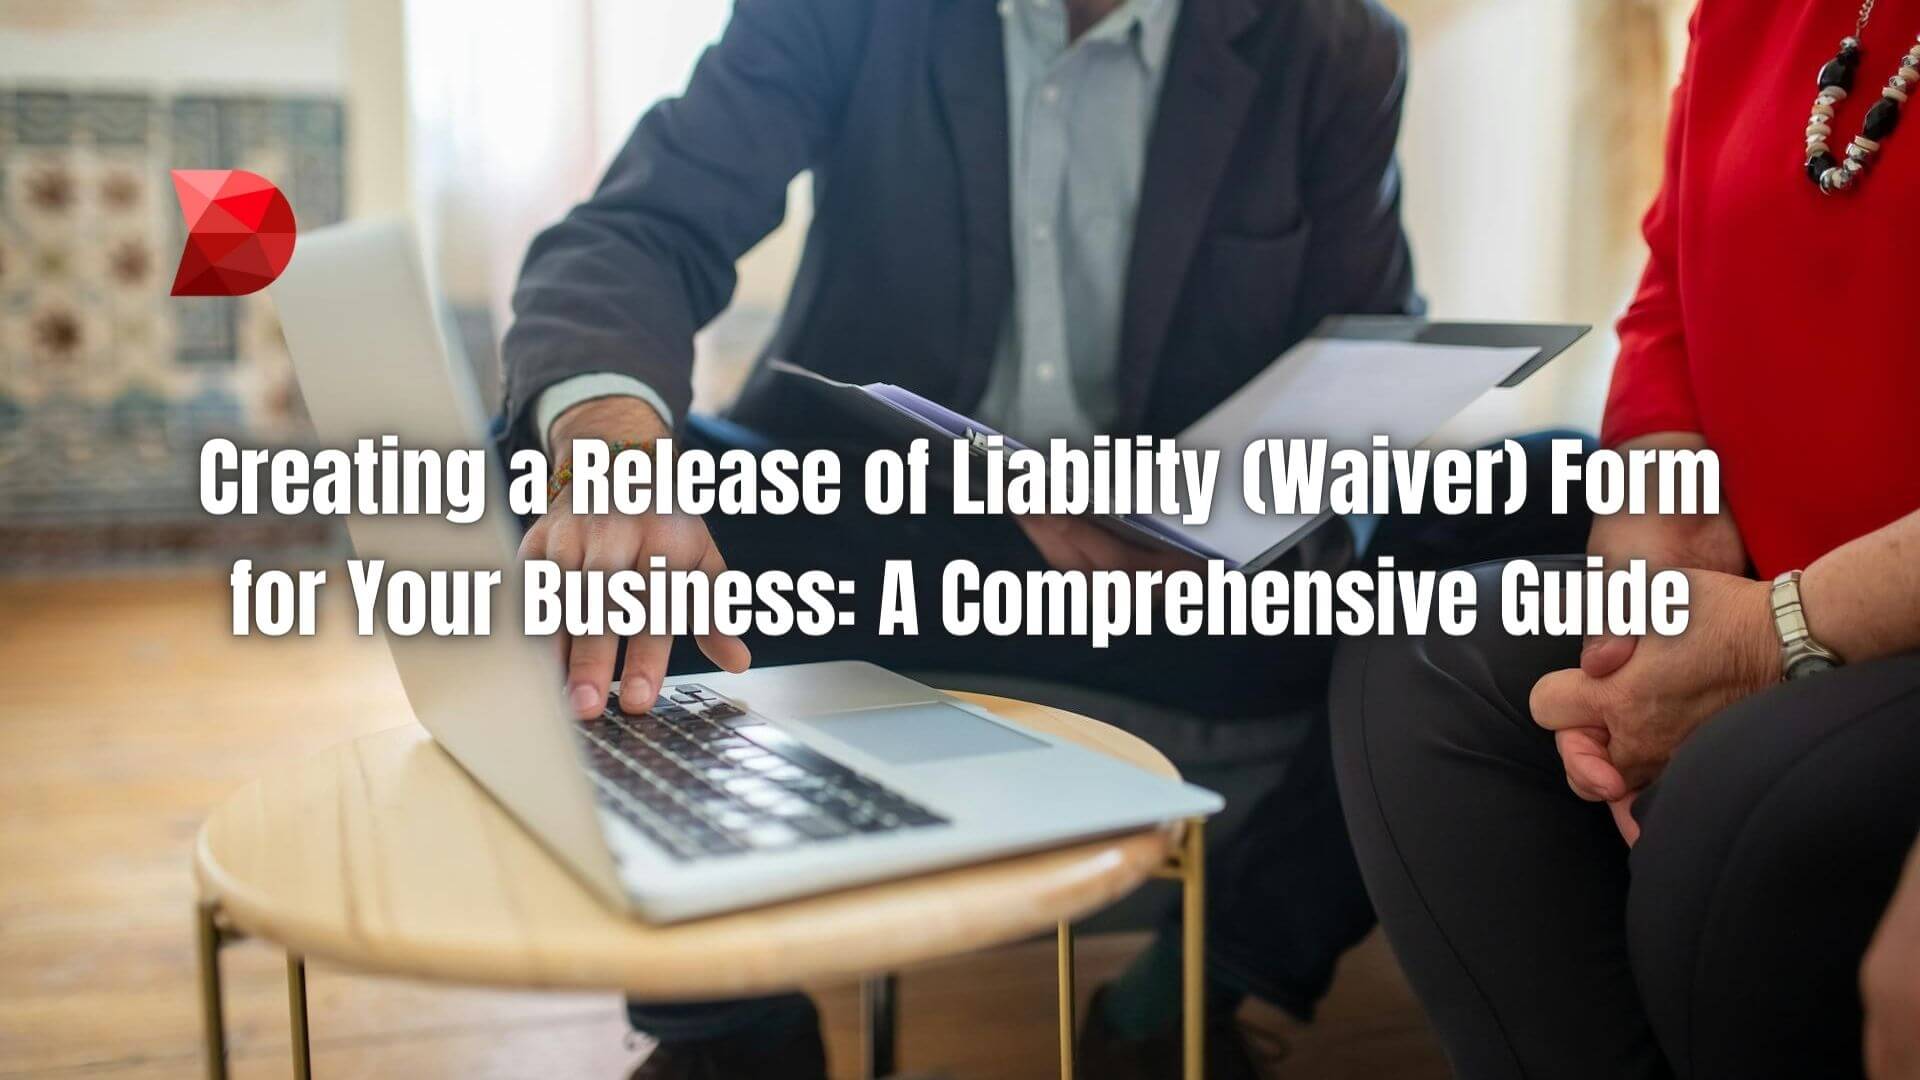 Mitigate risks and safeguard your business with our step-by-step guide. Learn how to draft a release of liability (waiver) form like a pro!